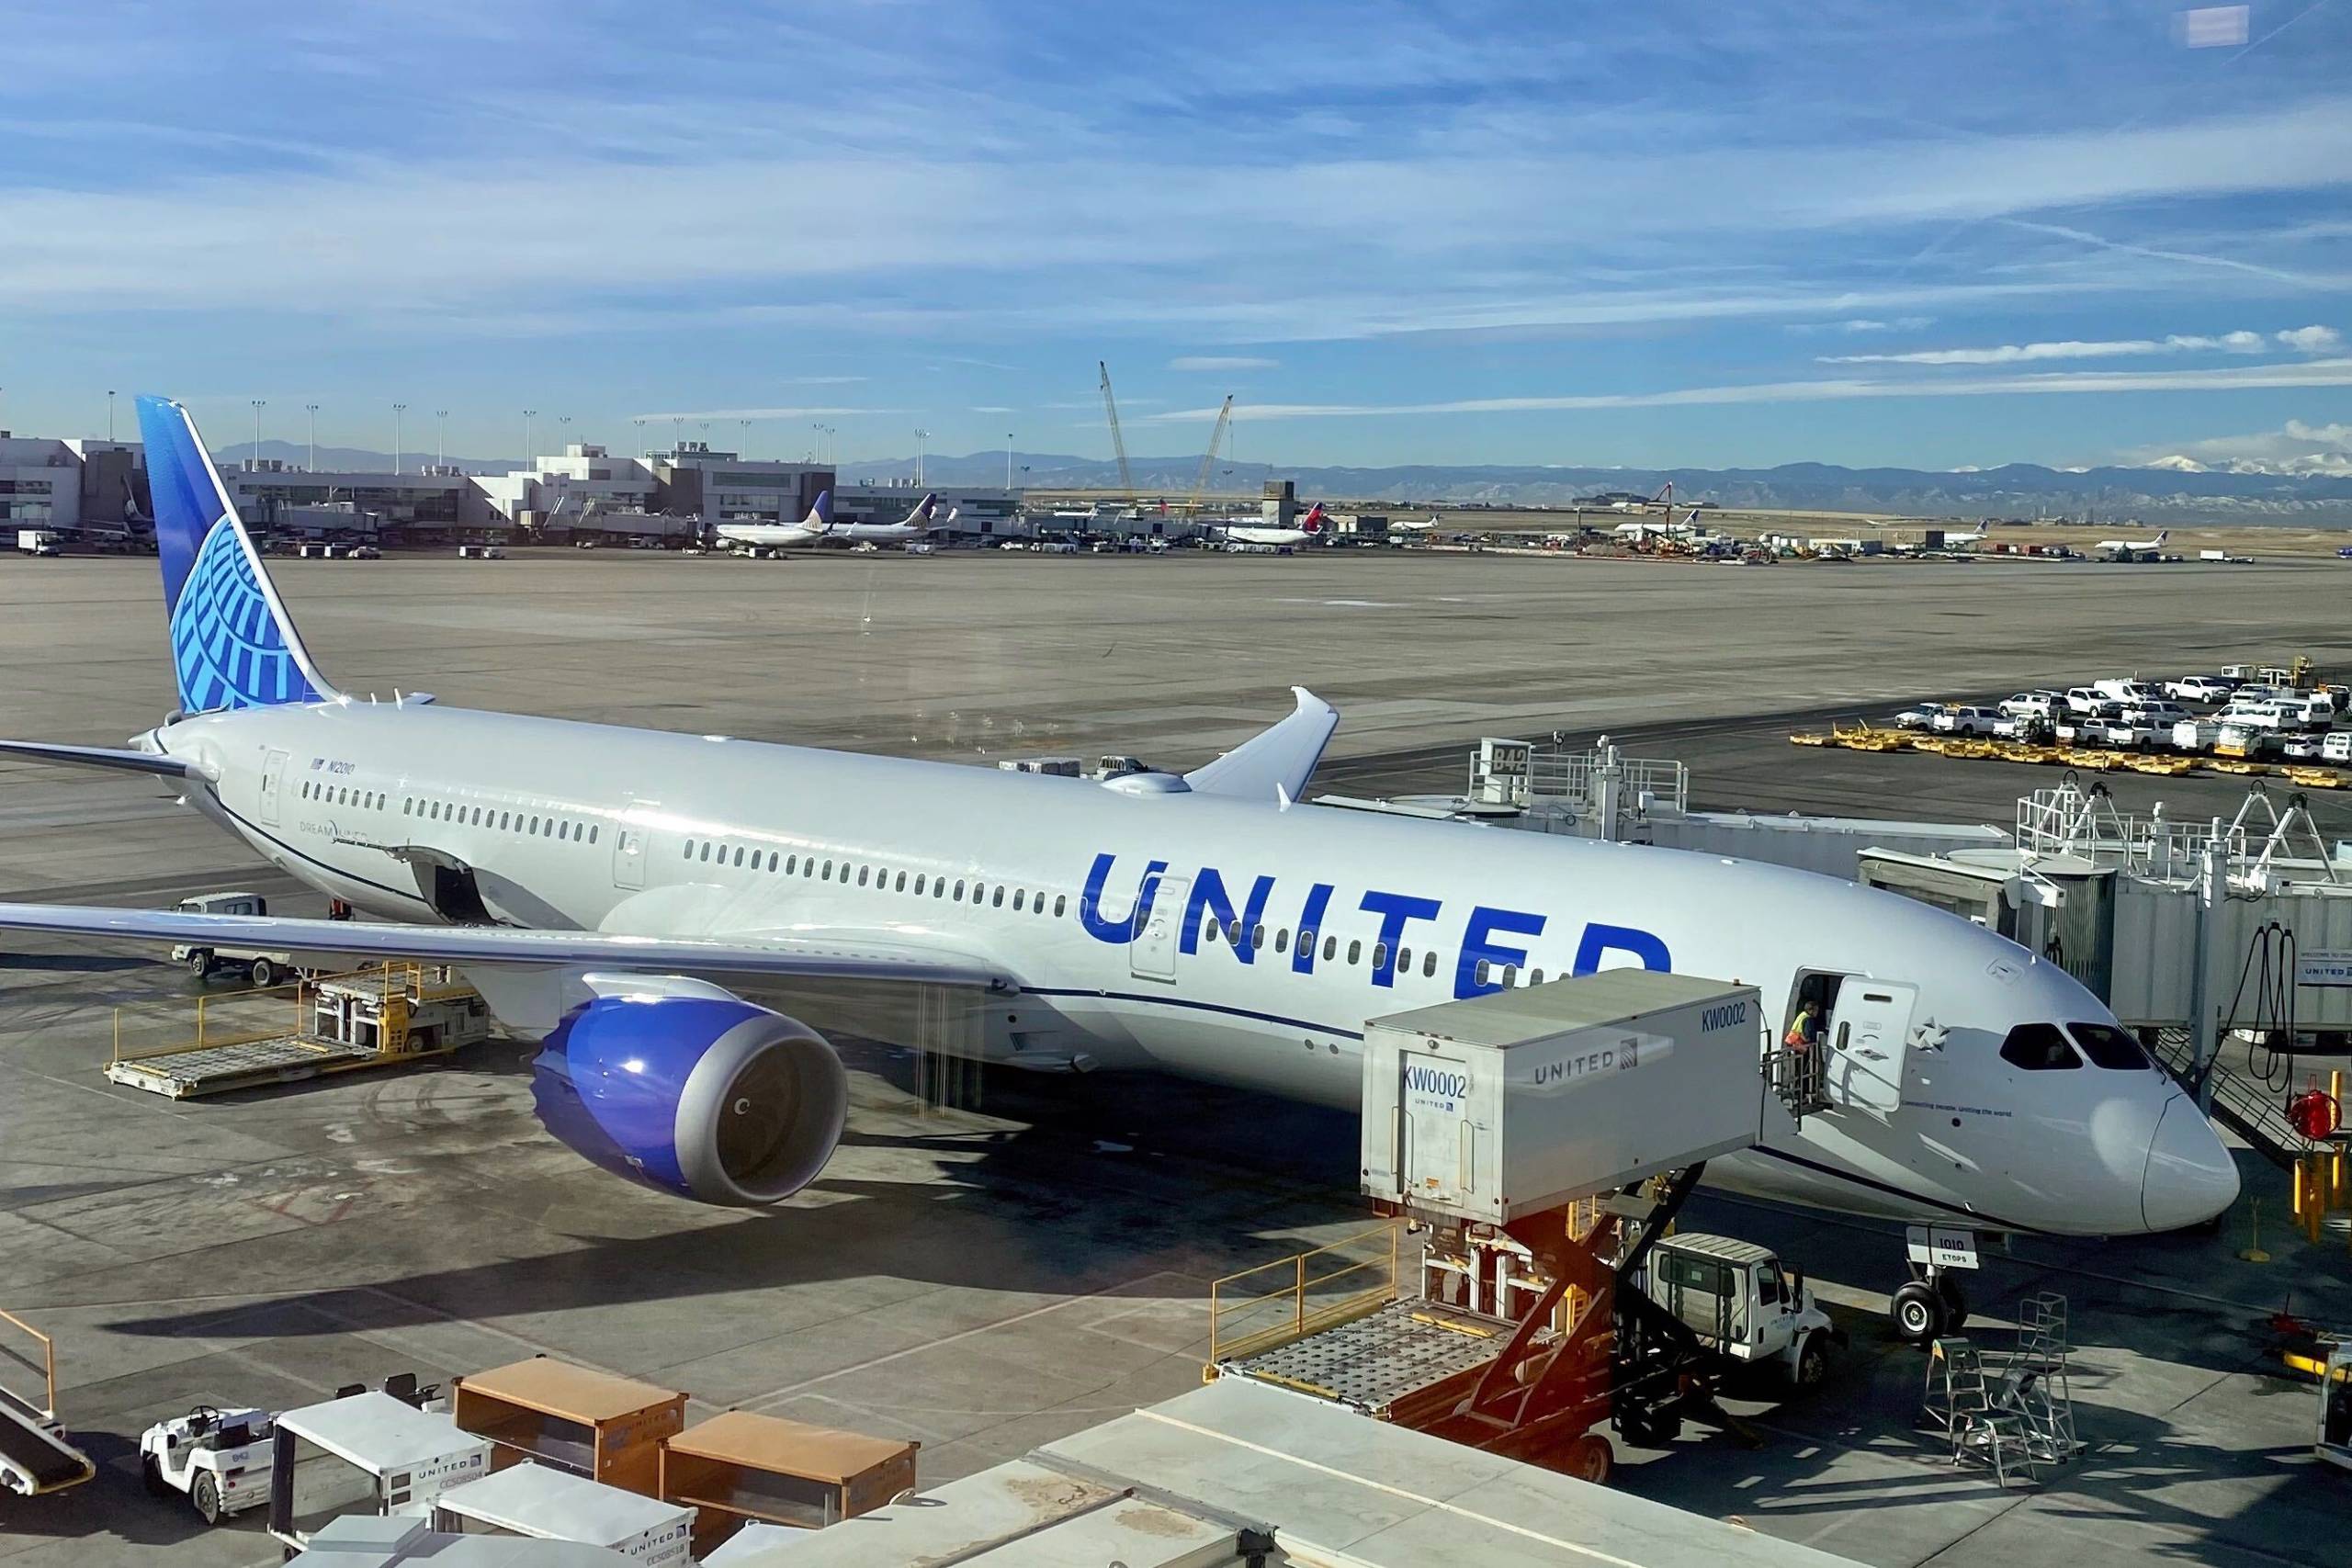 United's new livery on a Boeing 787 at Denver airport.